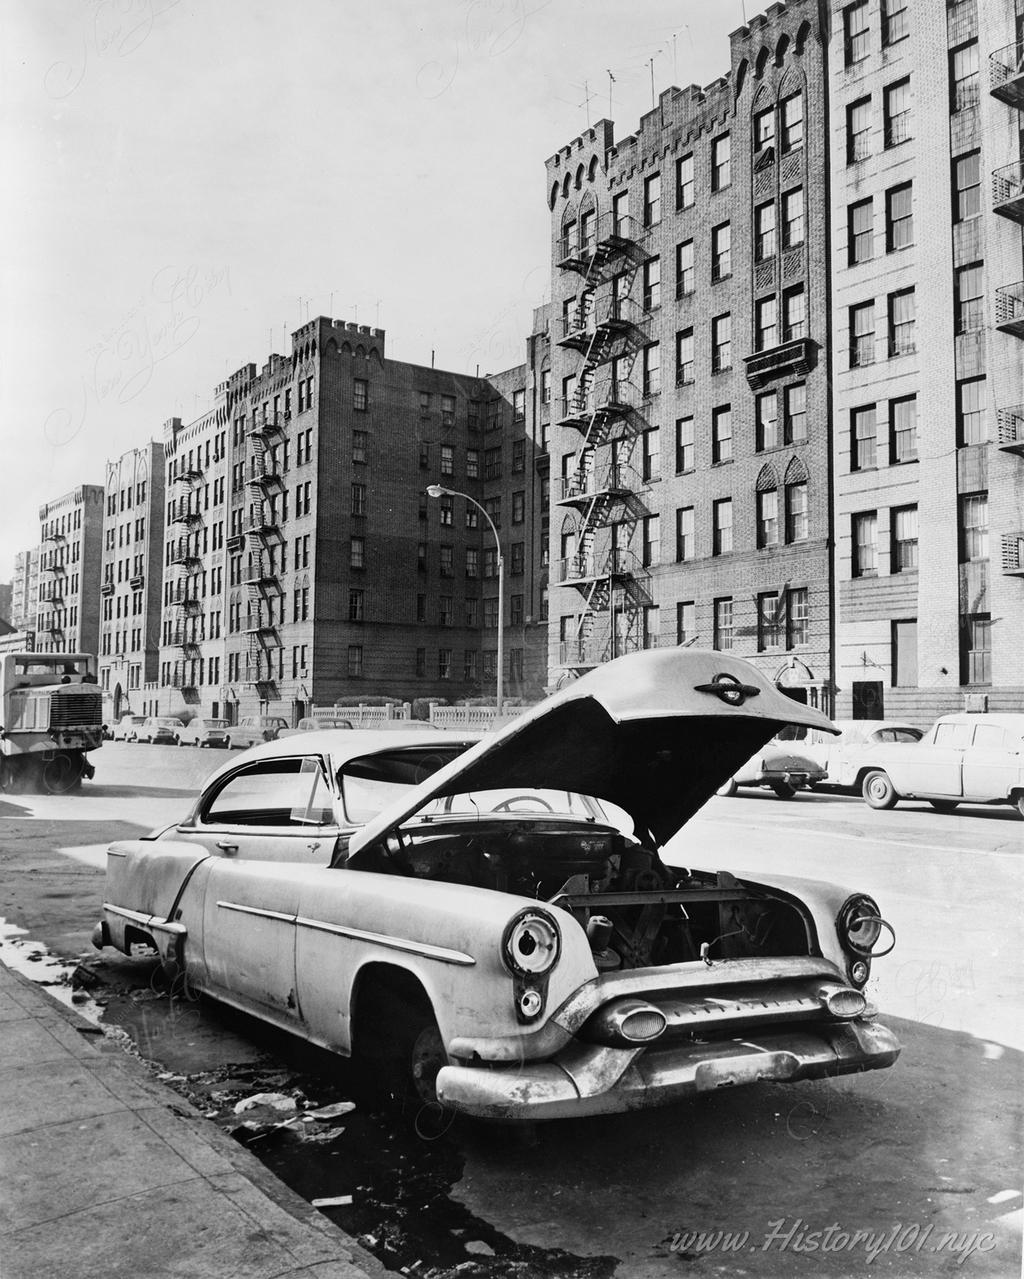 Photograph of an abandoned car on Macombs Road in the Bronx, New York City.